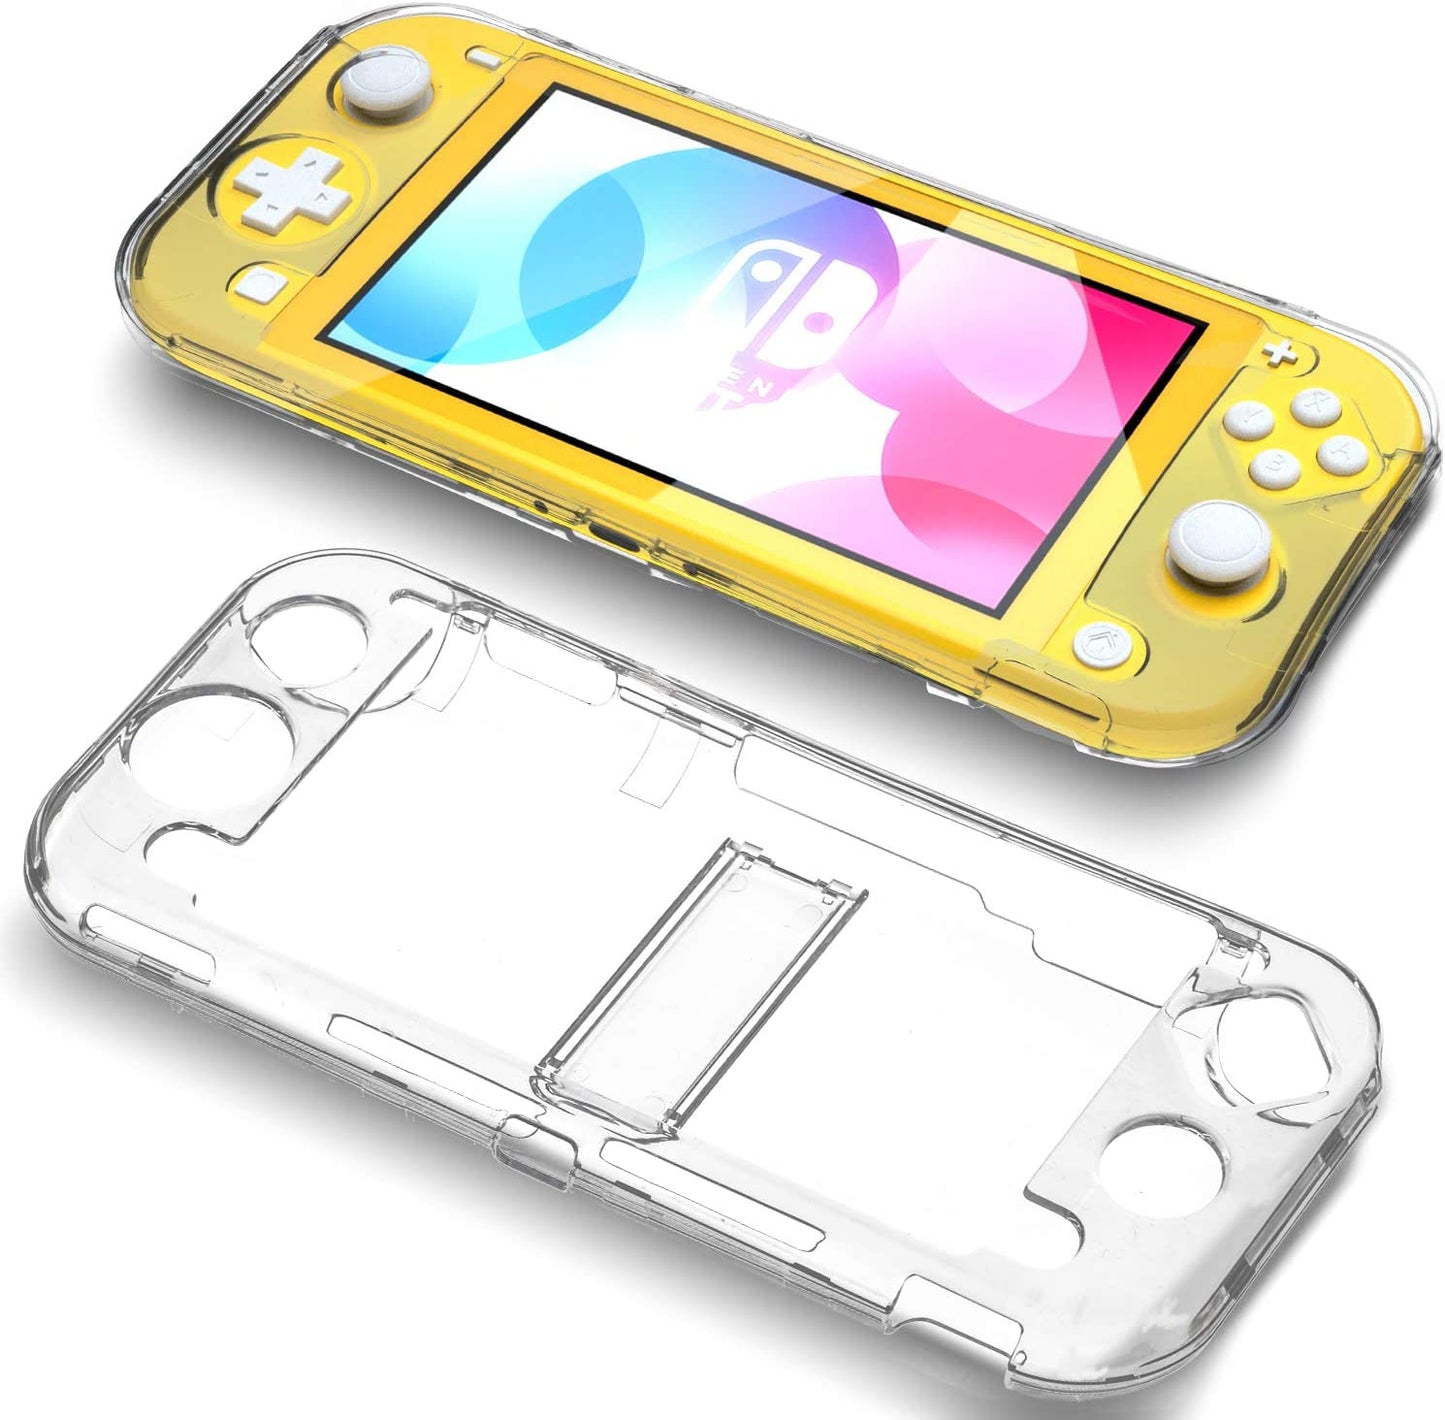 Crystal Case for Nintendo Switch Lite with Kickstand